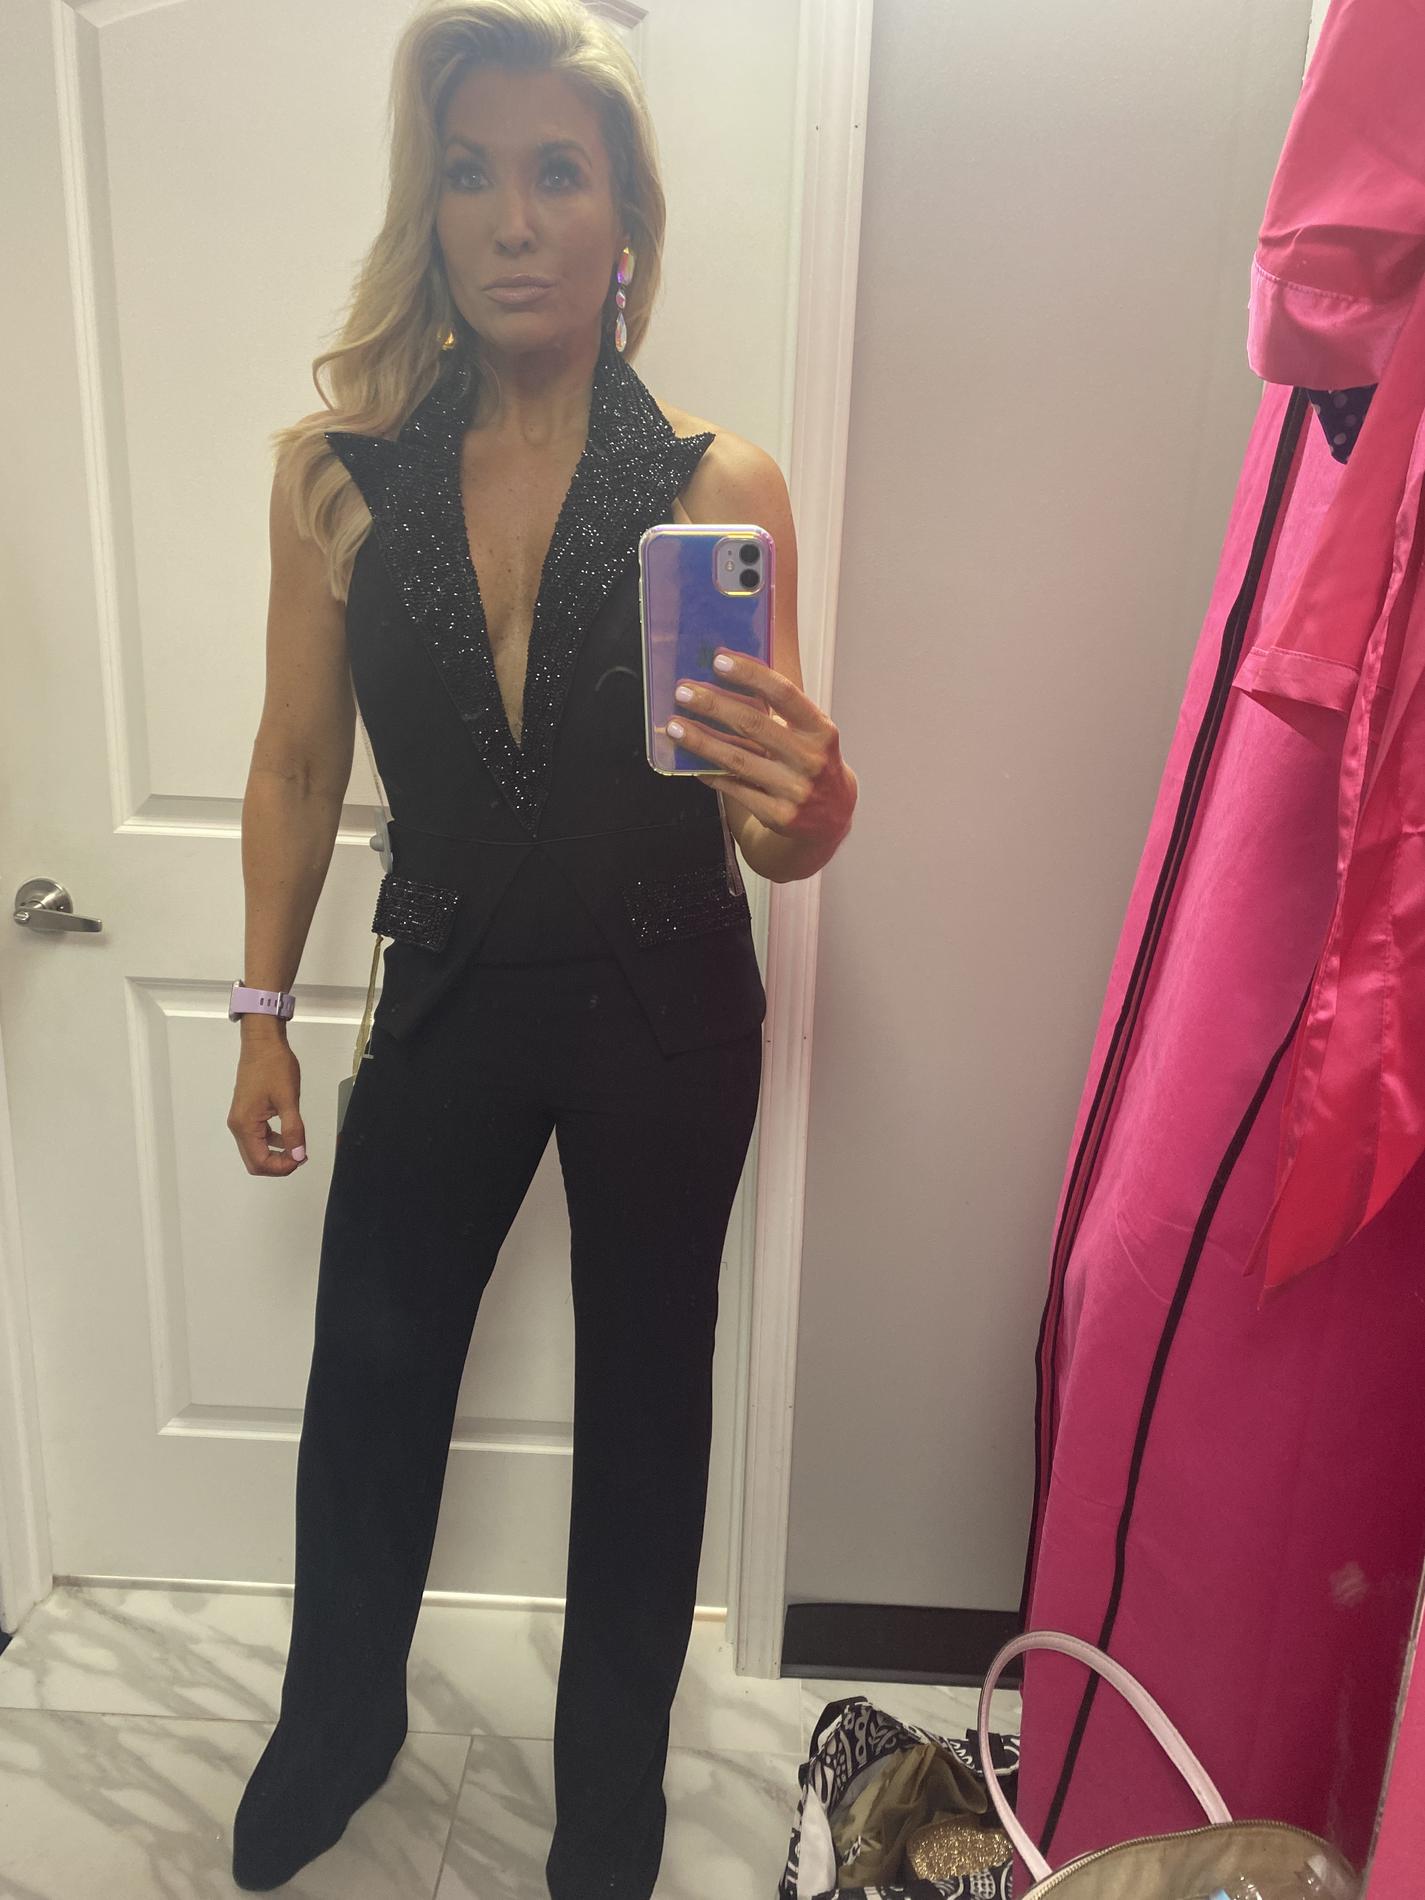 Size 8 Black Formal Jumpsuit on Queenly